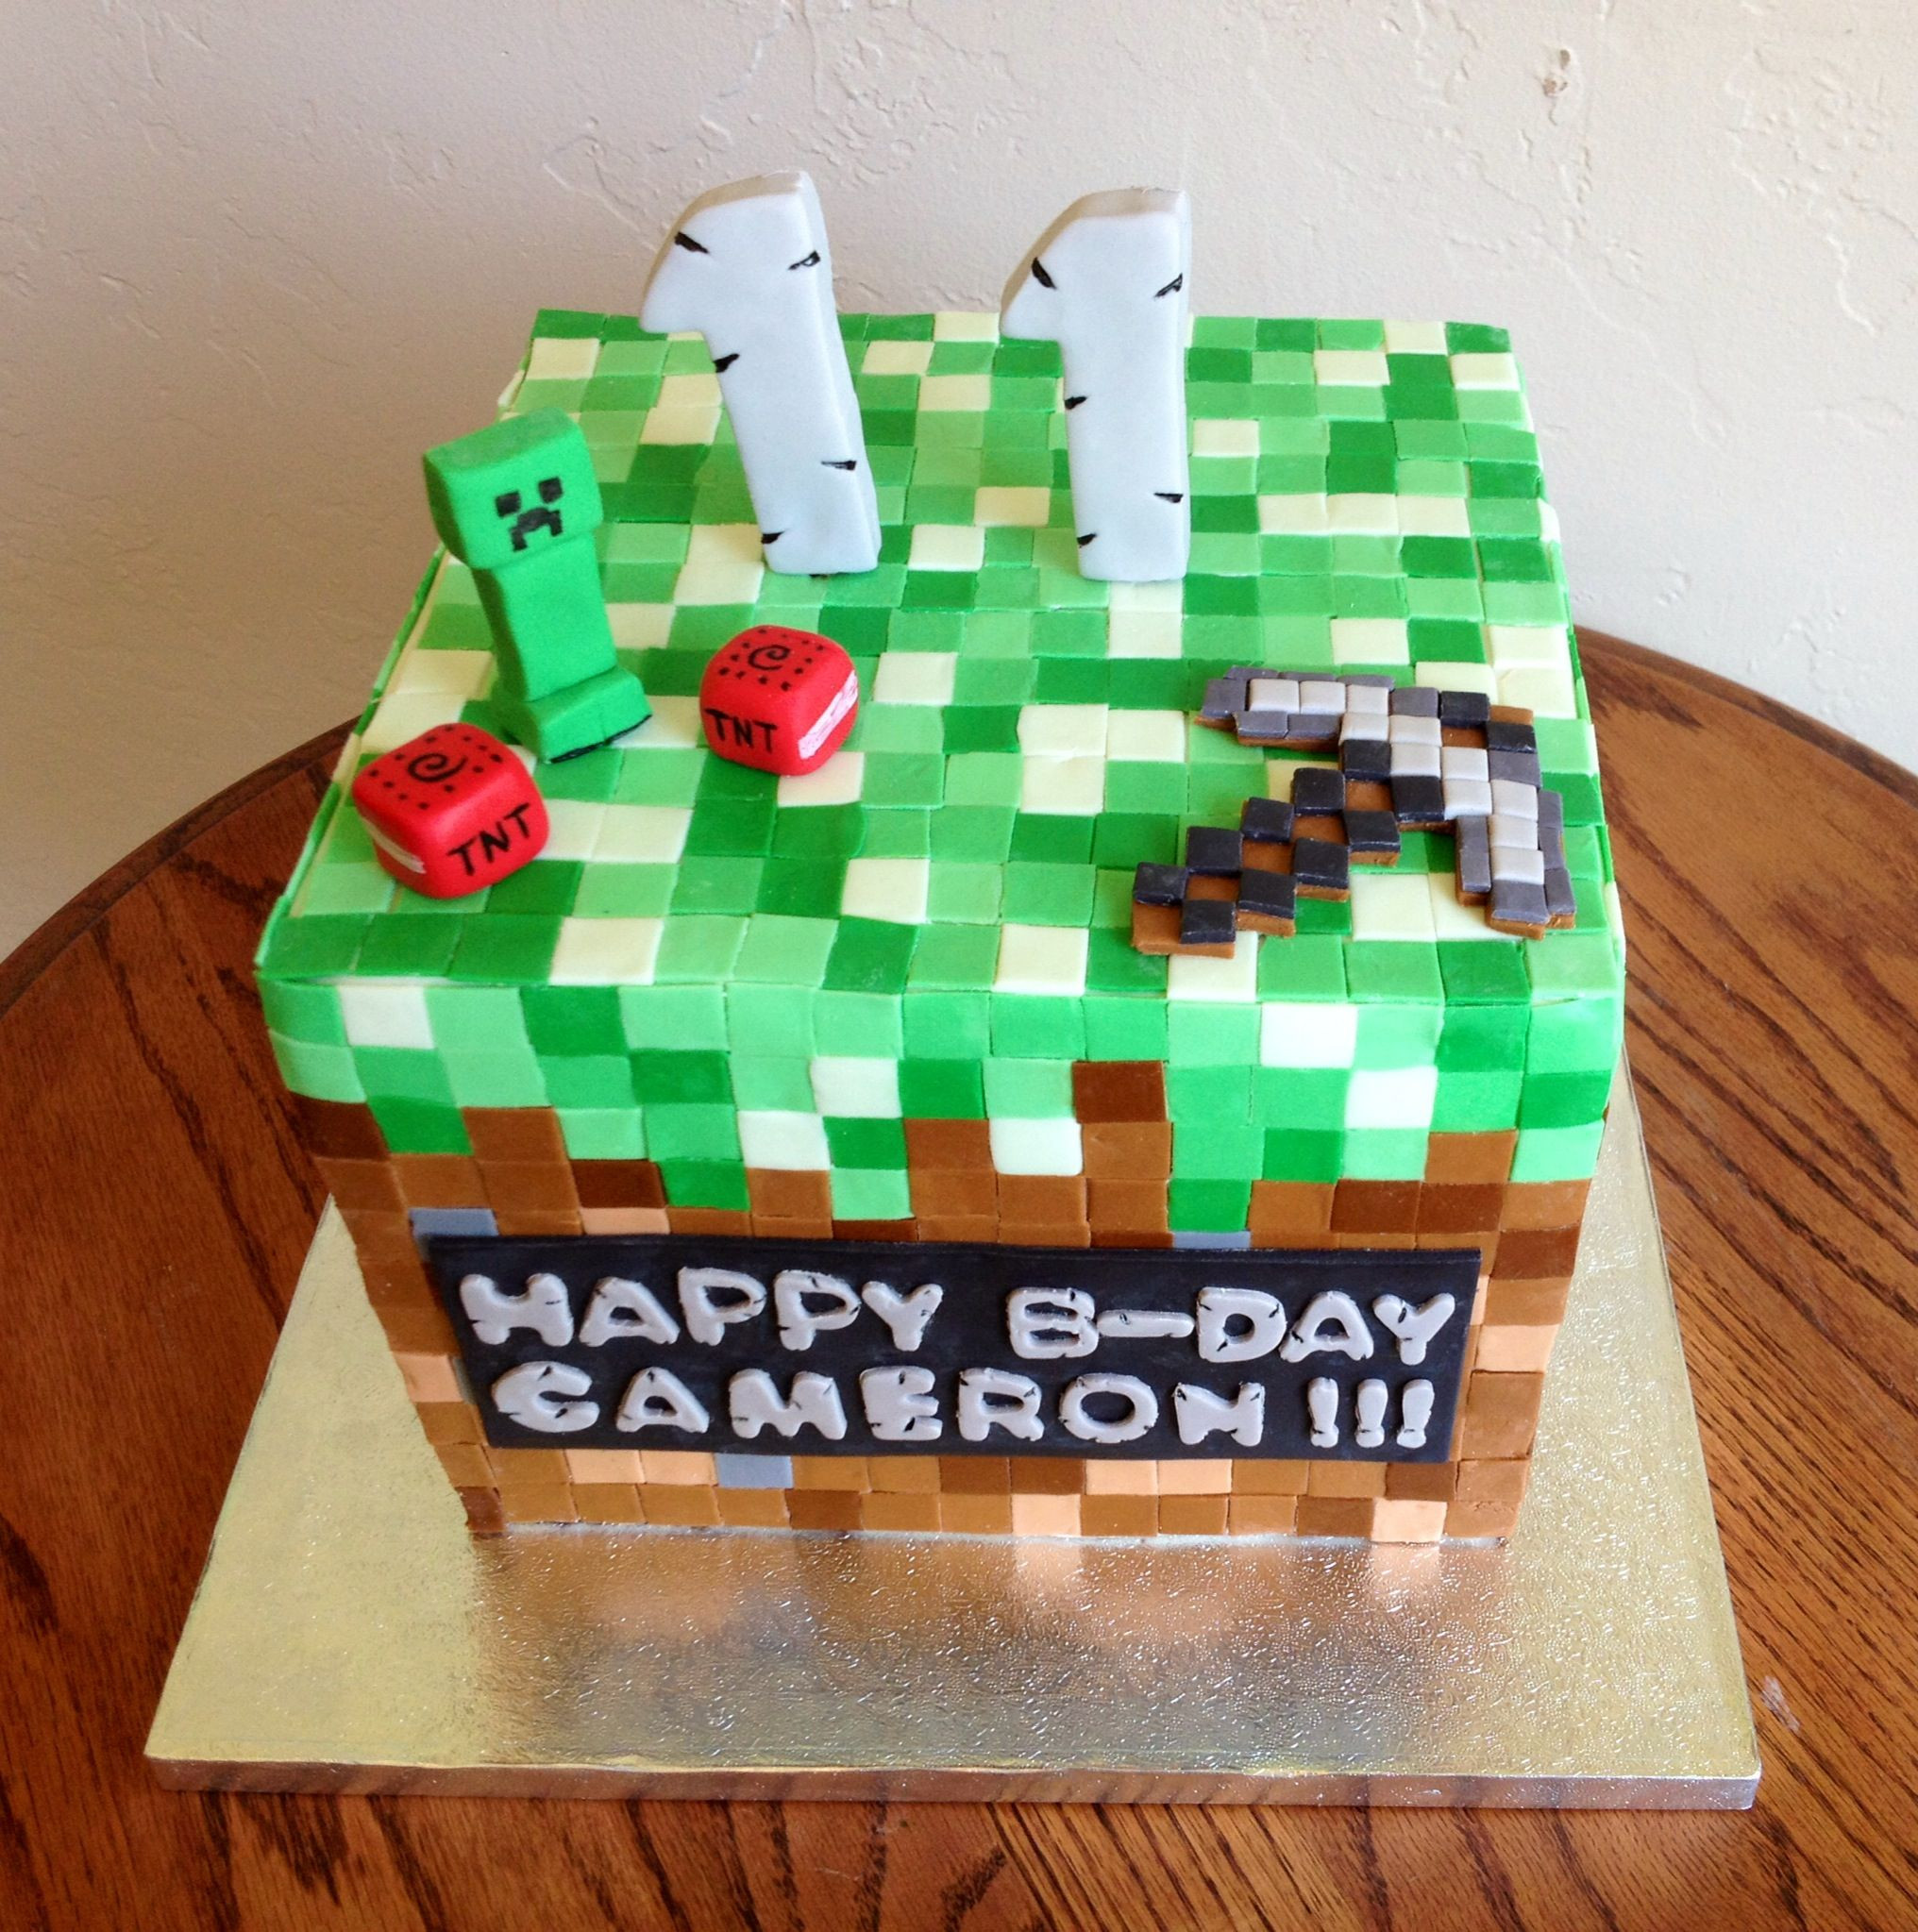 11 Year Old Boy Birthday Party Ideas
 Minecraft Cake for an 11 year old birthday boy He was so